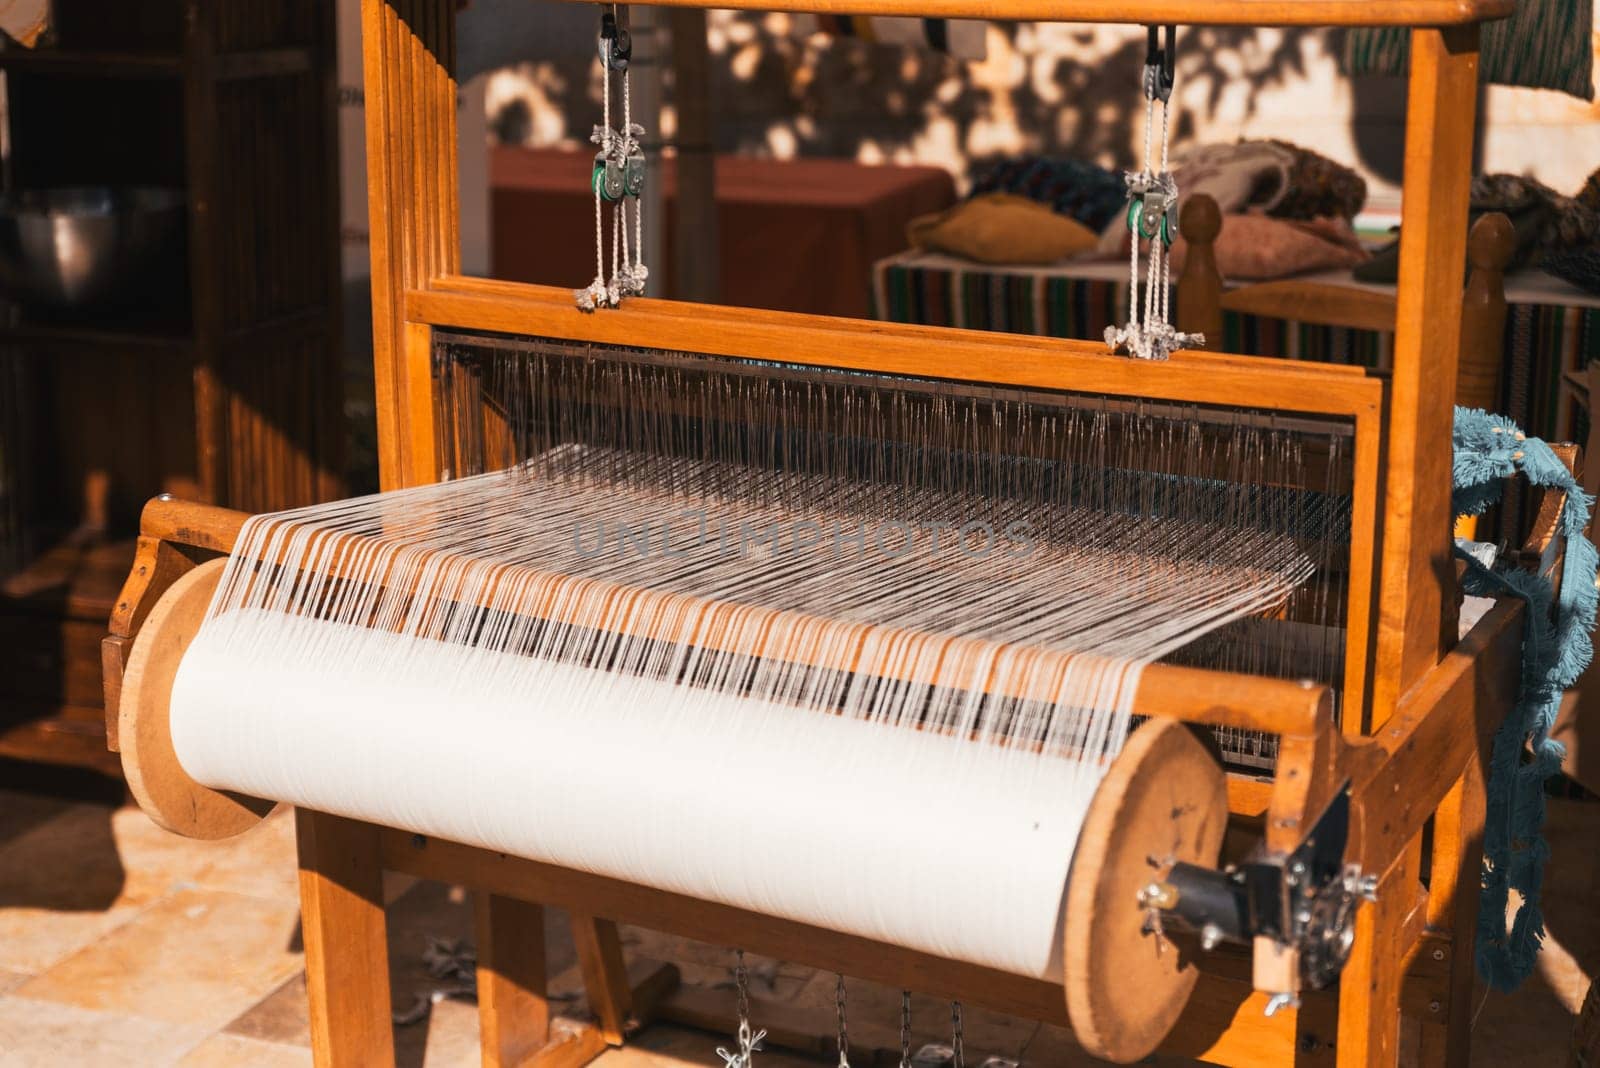 Master weaver is weaving the tapestry with diverse bright threads, close up. Artisanal at work by jcdiazhidalgo